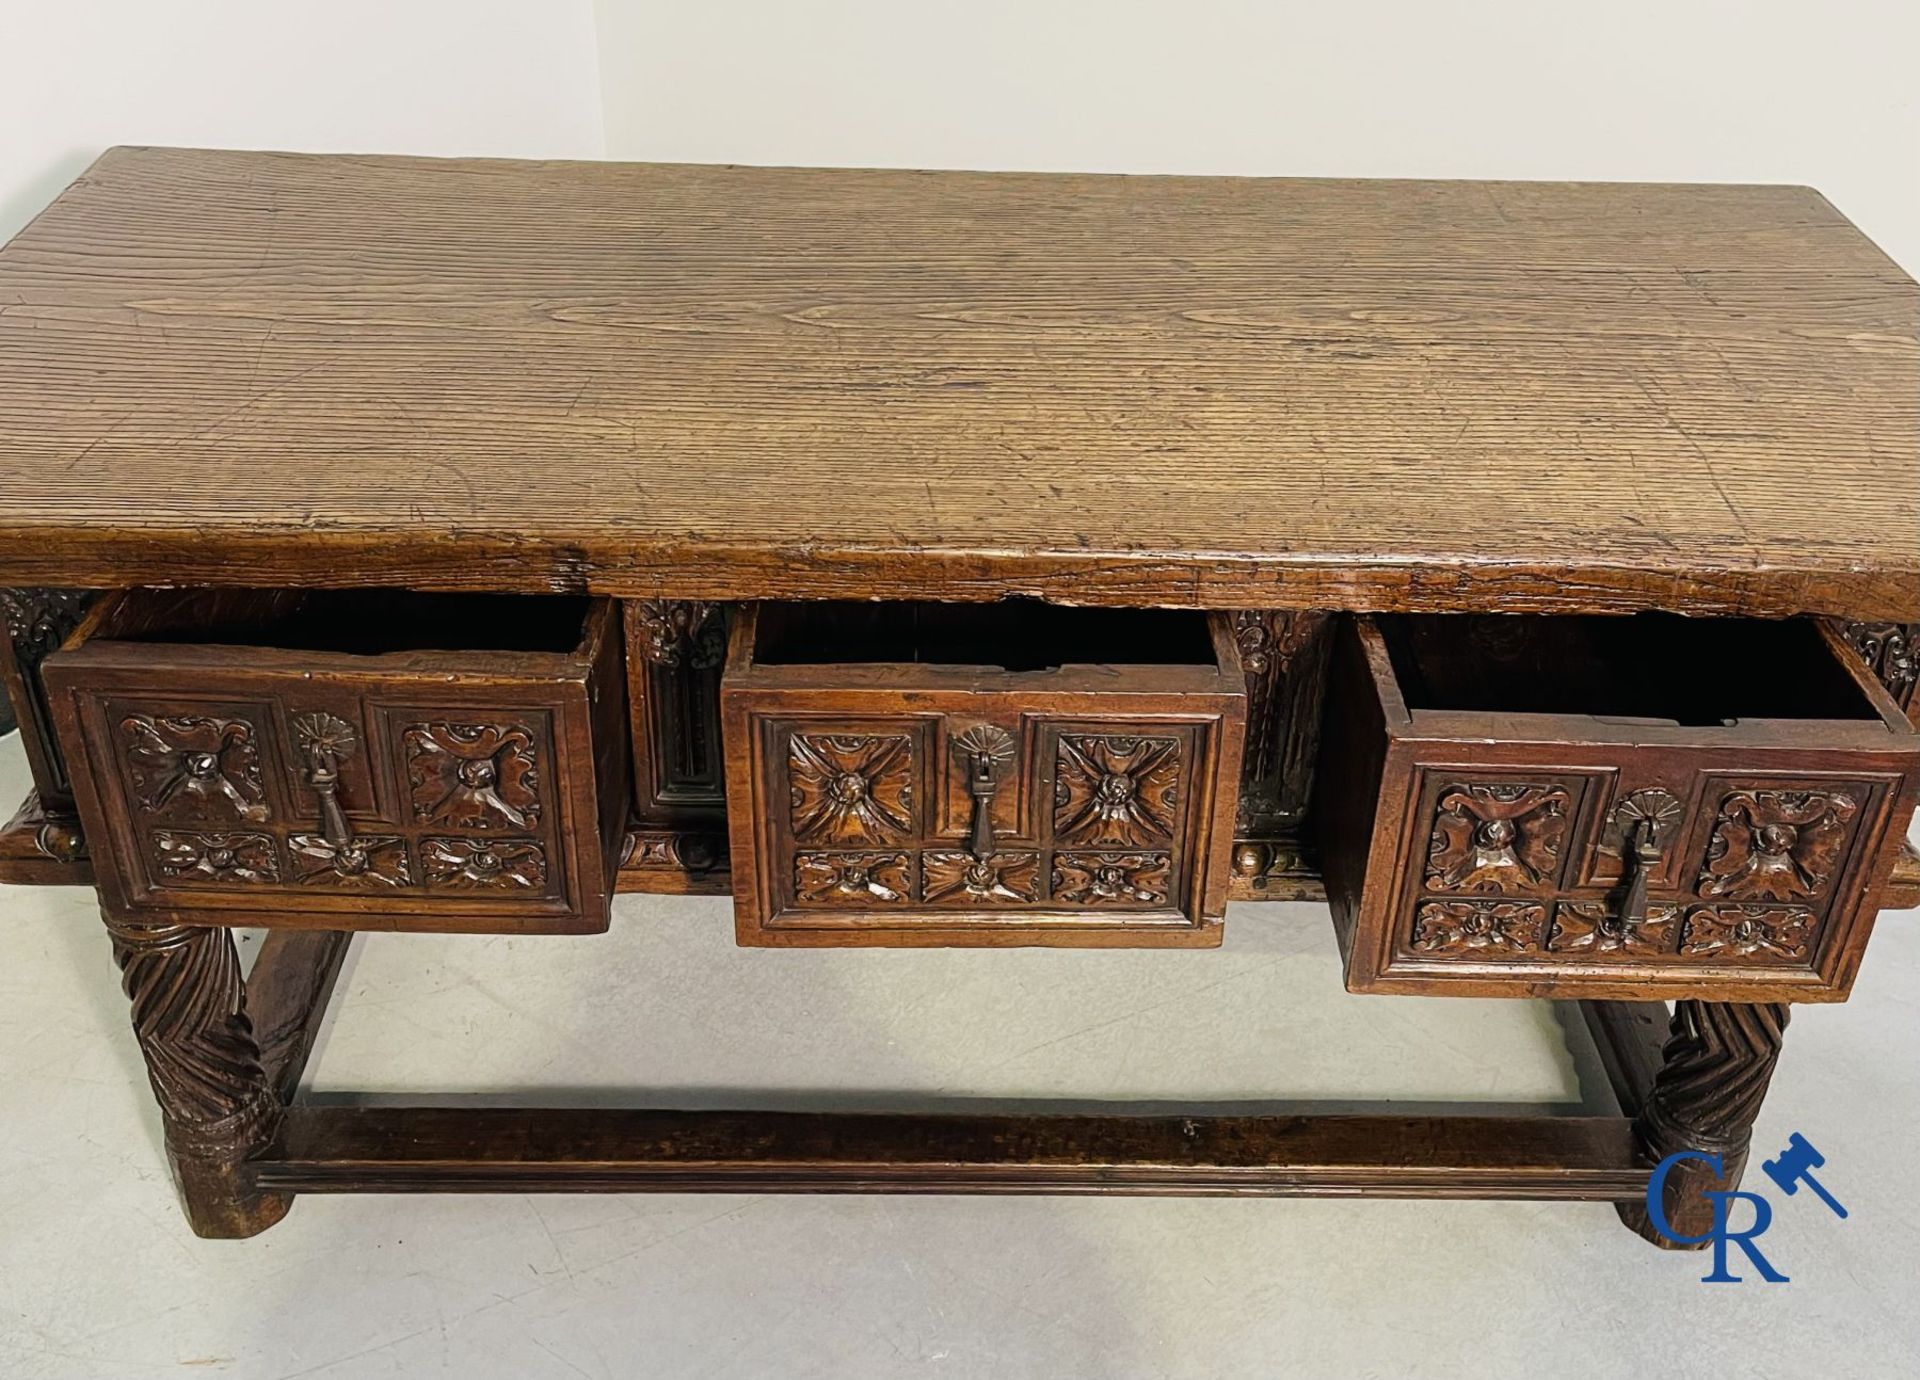 Furniture: 17th century carved walnut table with 3 drawers. - Image 12 of 22